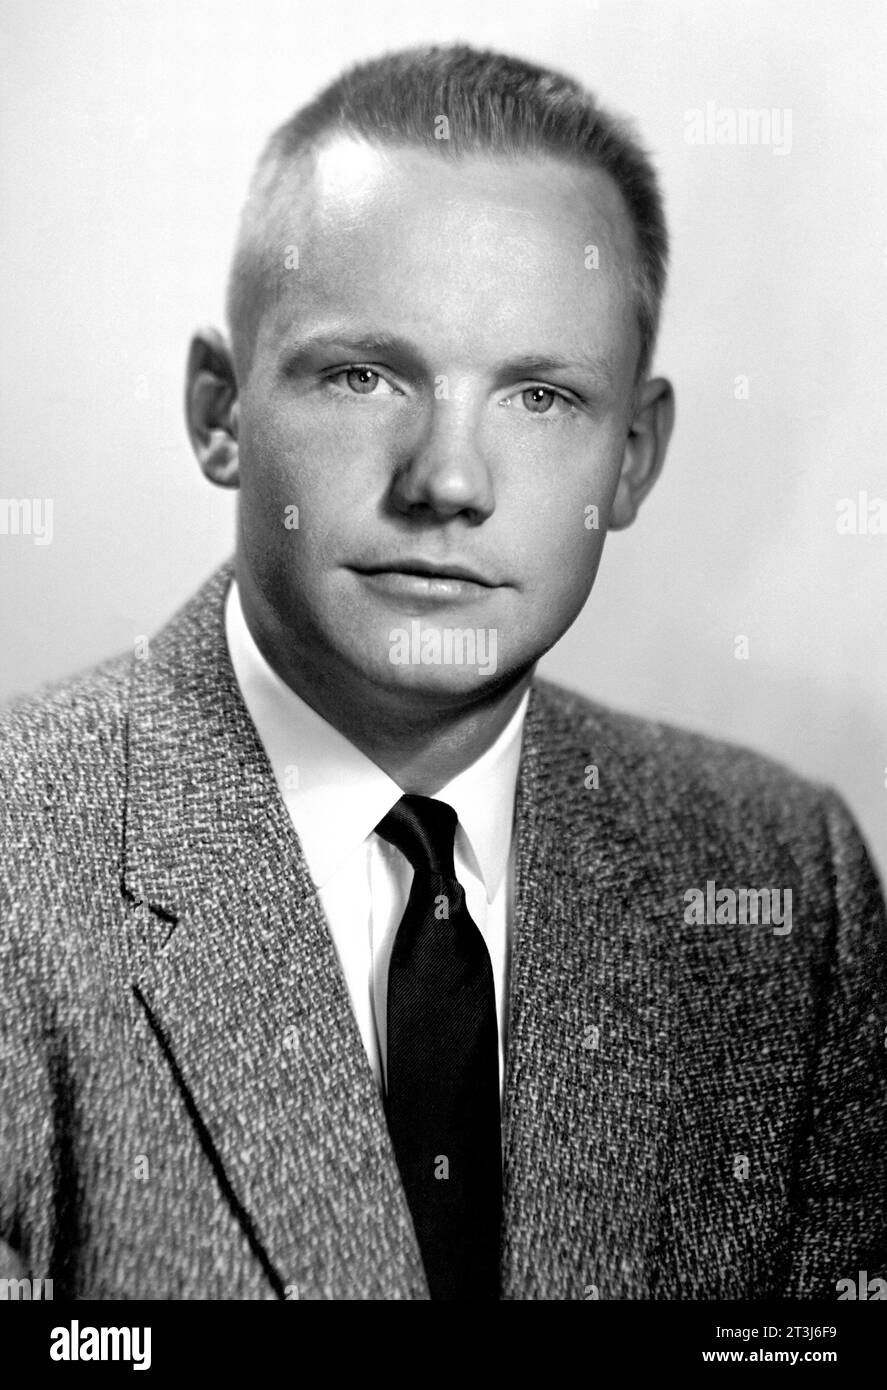 Neil A. Armstrong (1958) Neil A. Armstrong, Neil Armstrong, portrait of Apollo 11 Commander Neil Armstrong. Neil Alden Armstrong (1930 – 2012) American astronaut and aeronautical engineer who in 1969 became the first person to walk on the Moon. Stock Photo